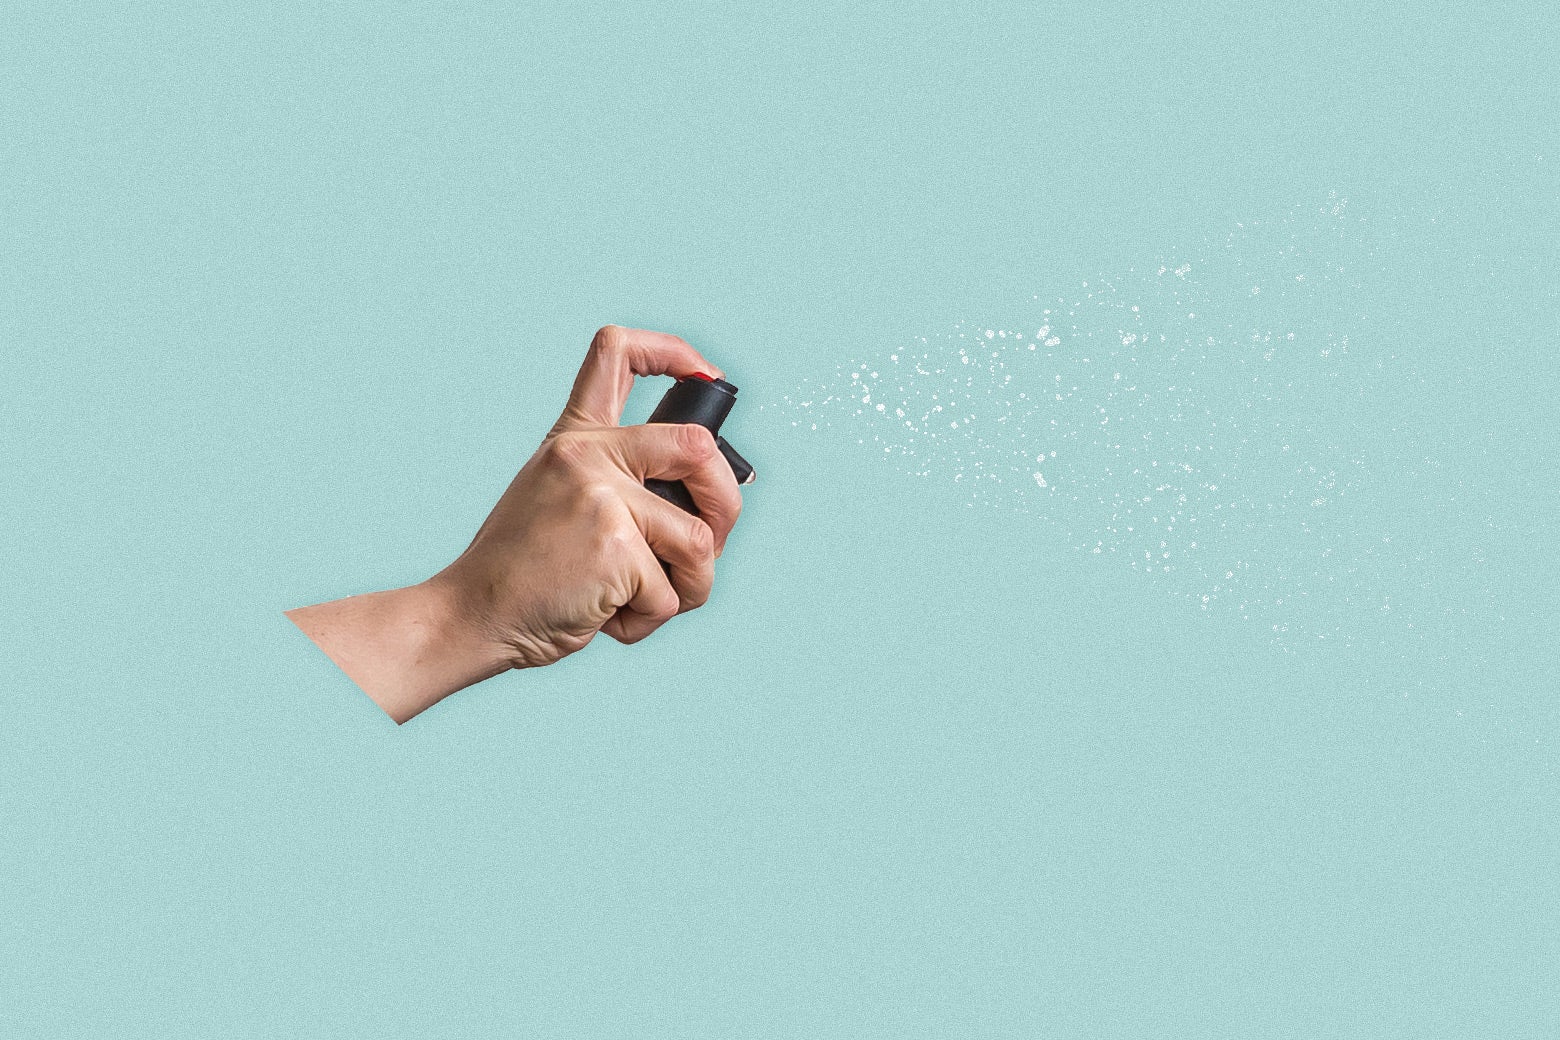 A hand holding pepper spray against a blue backdrop. 